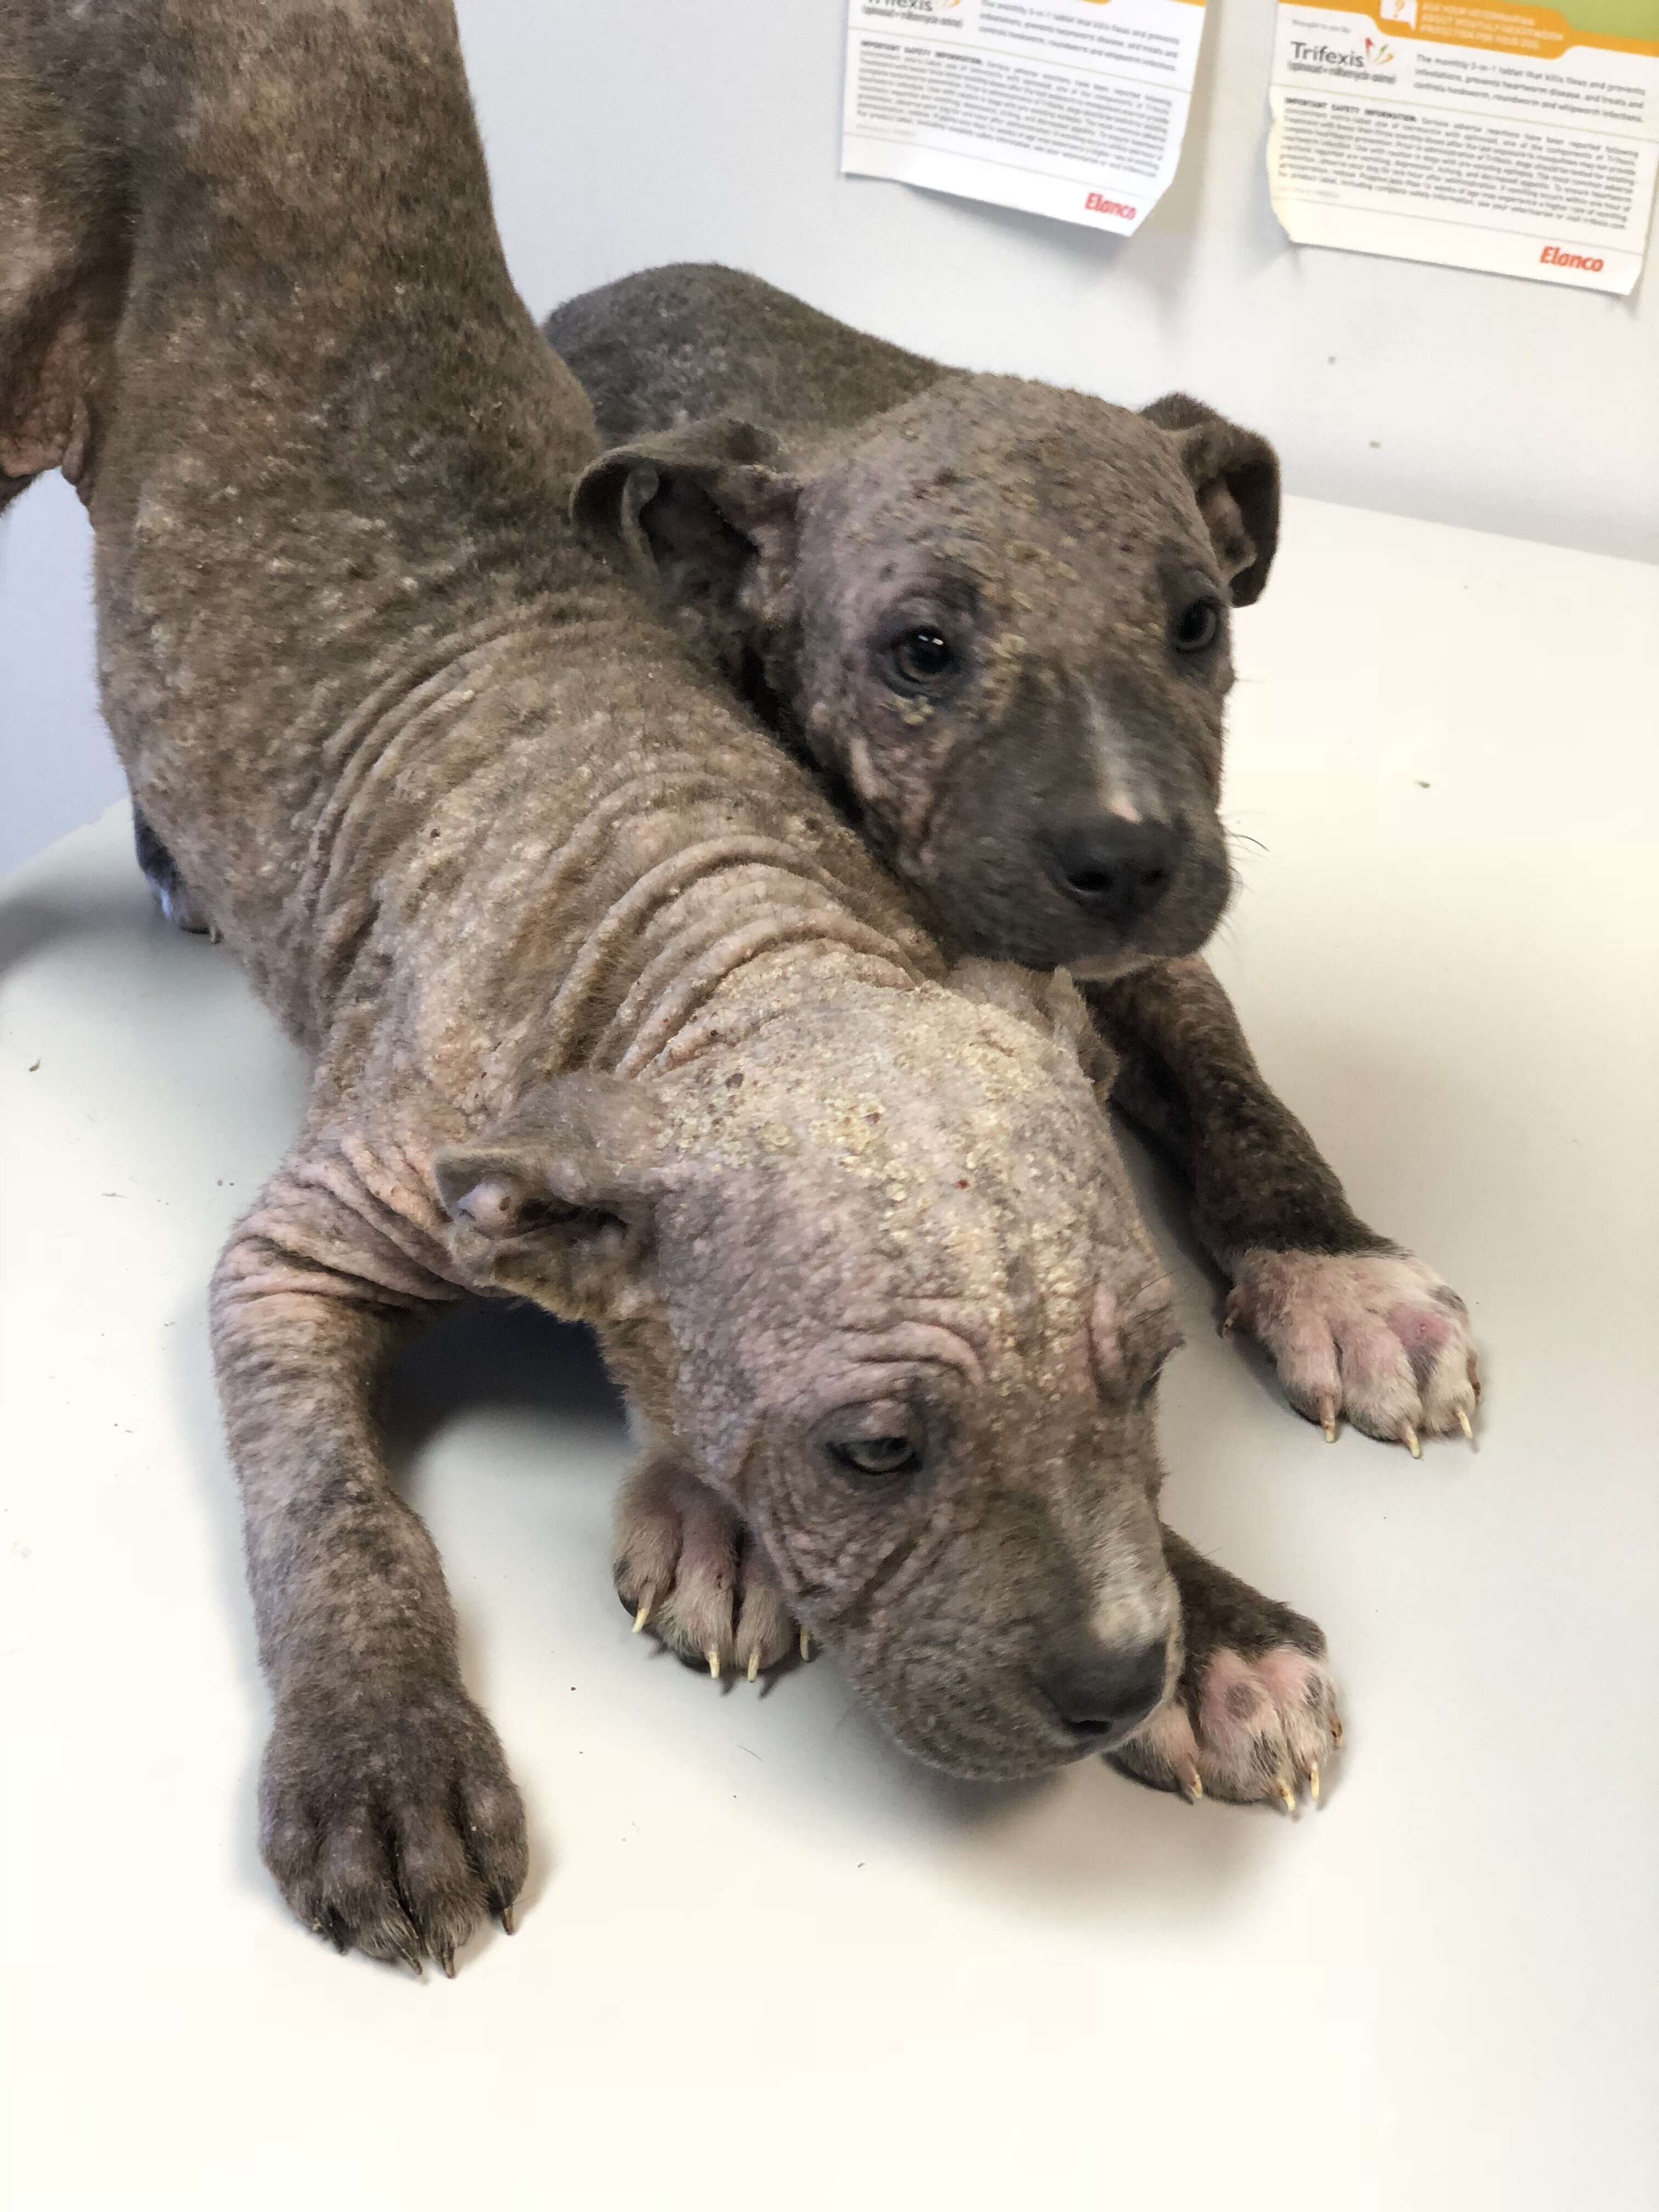 Two puppies with mange on exam table